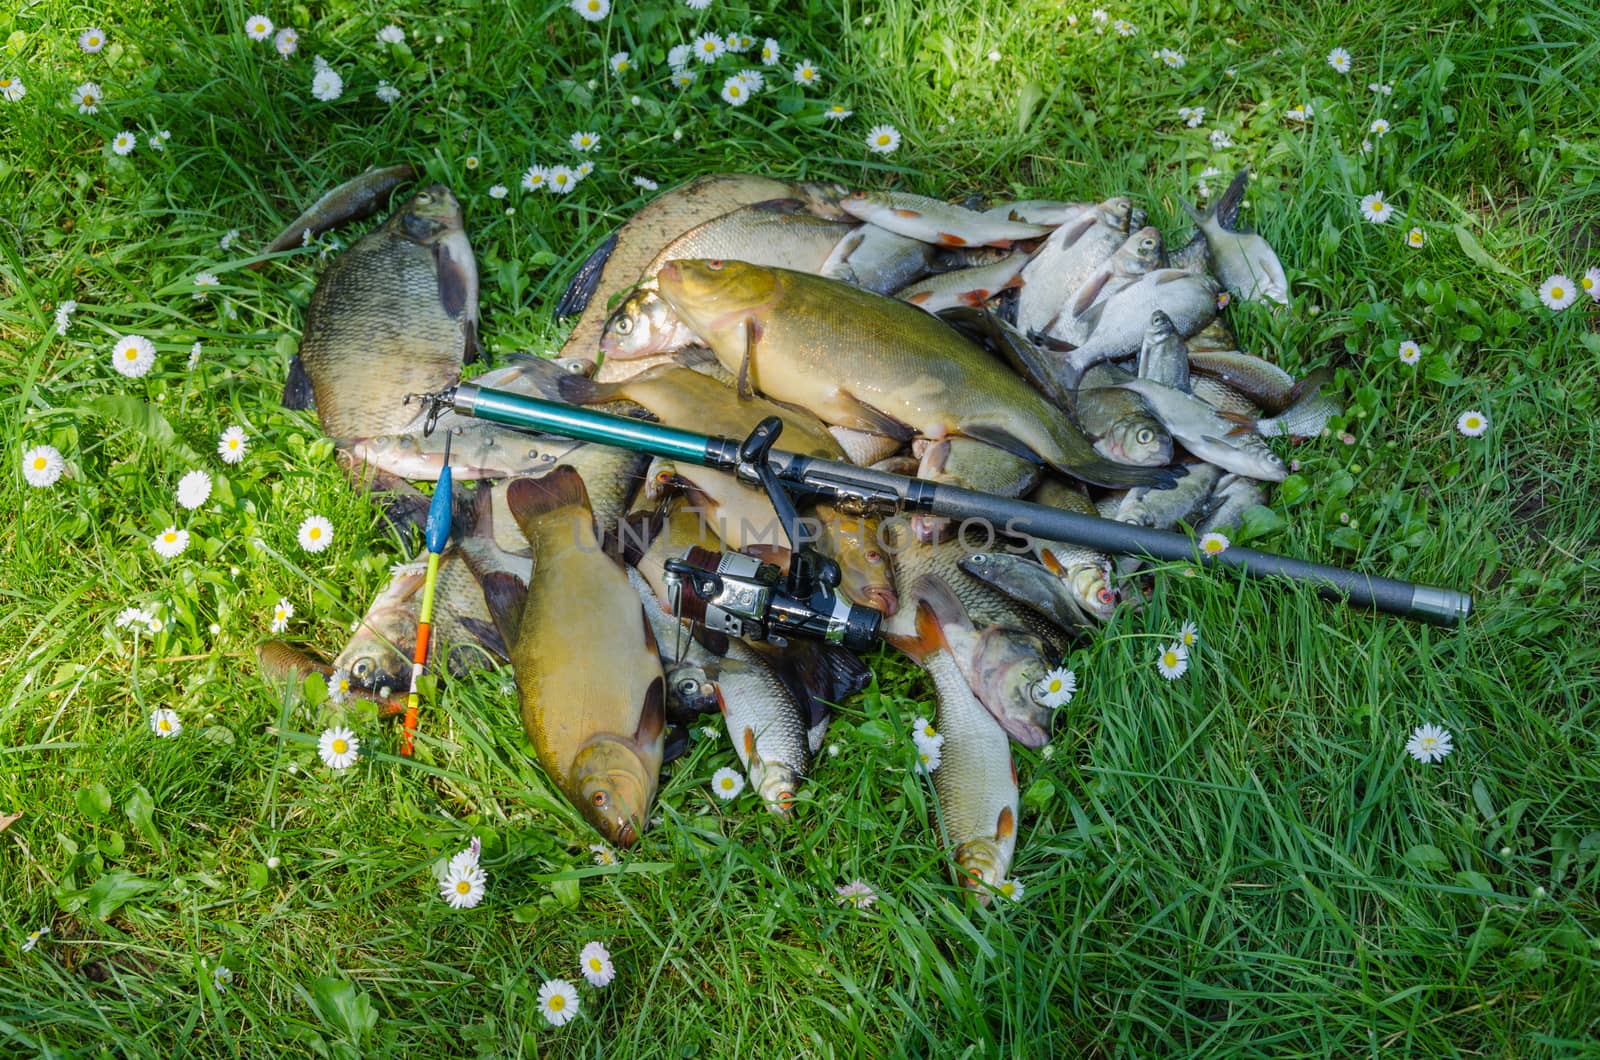 successfull fish catch pile on grass with rod and float